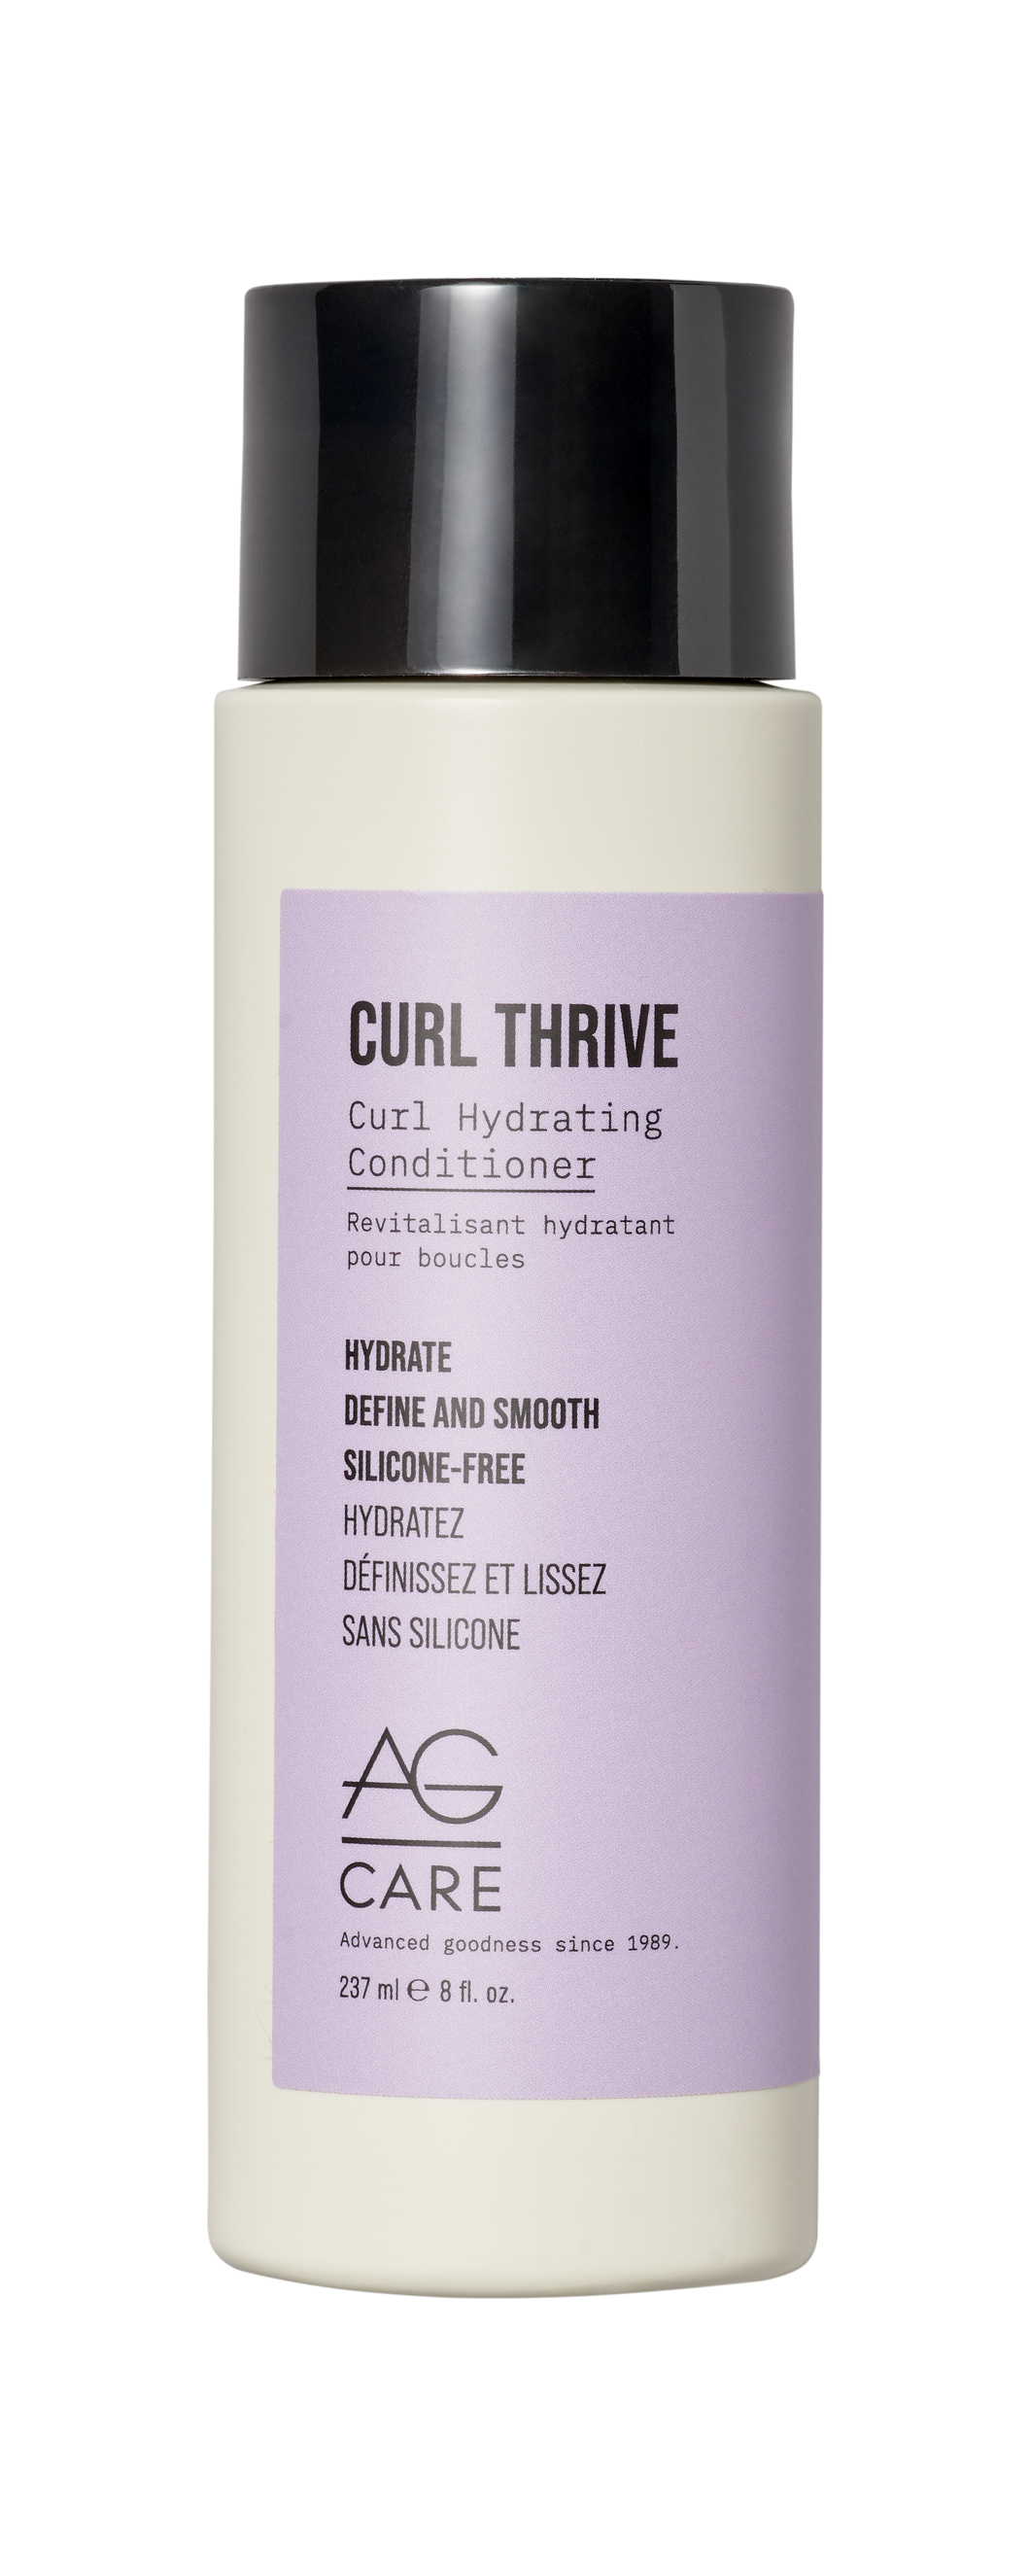 AG Curl Thrive Conditioner